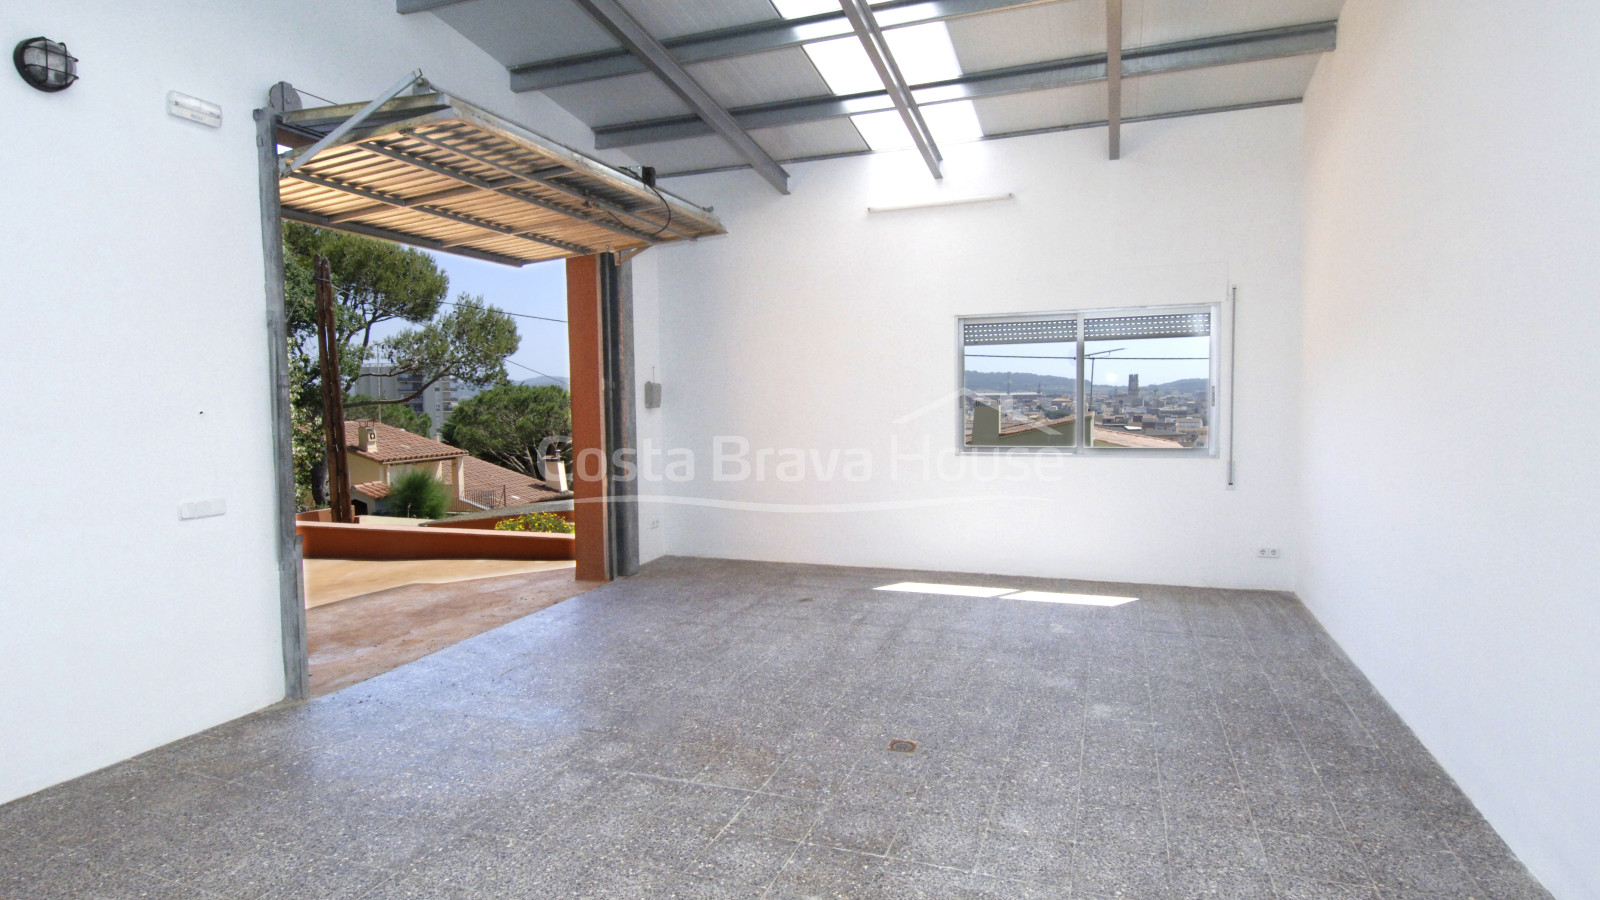 Almost brand new house with garden for sale in the outskirts of Palafrugell. Possibility of  pool.